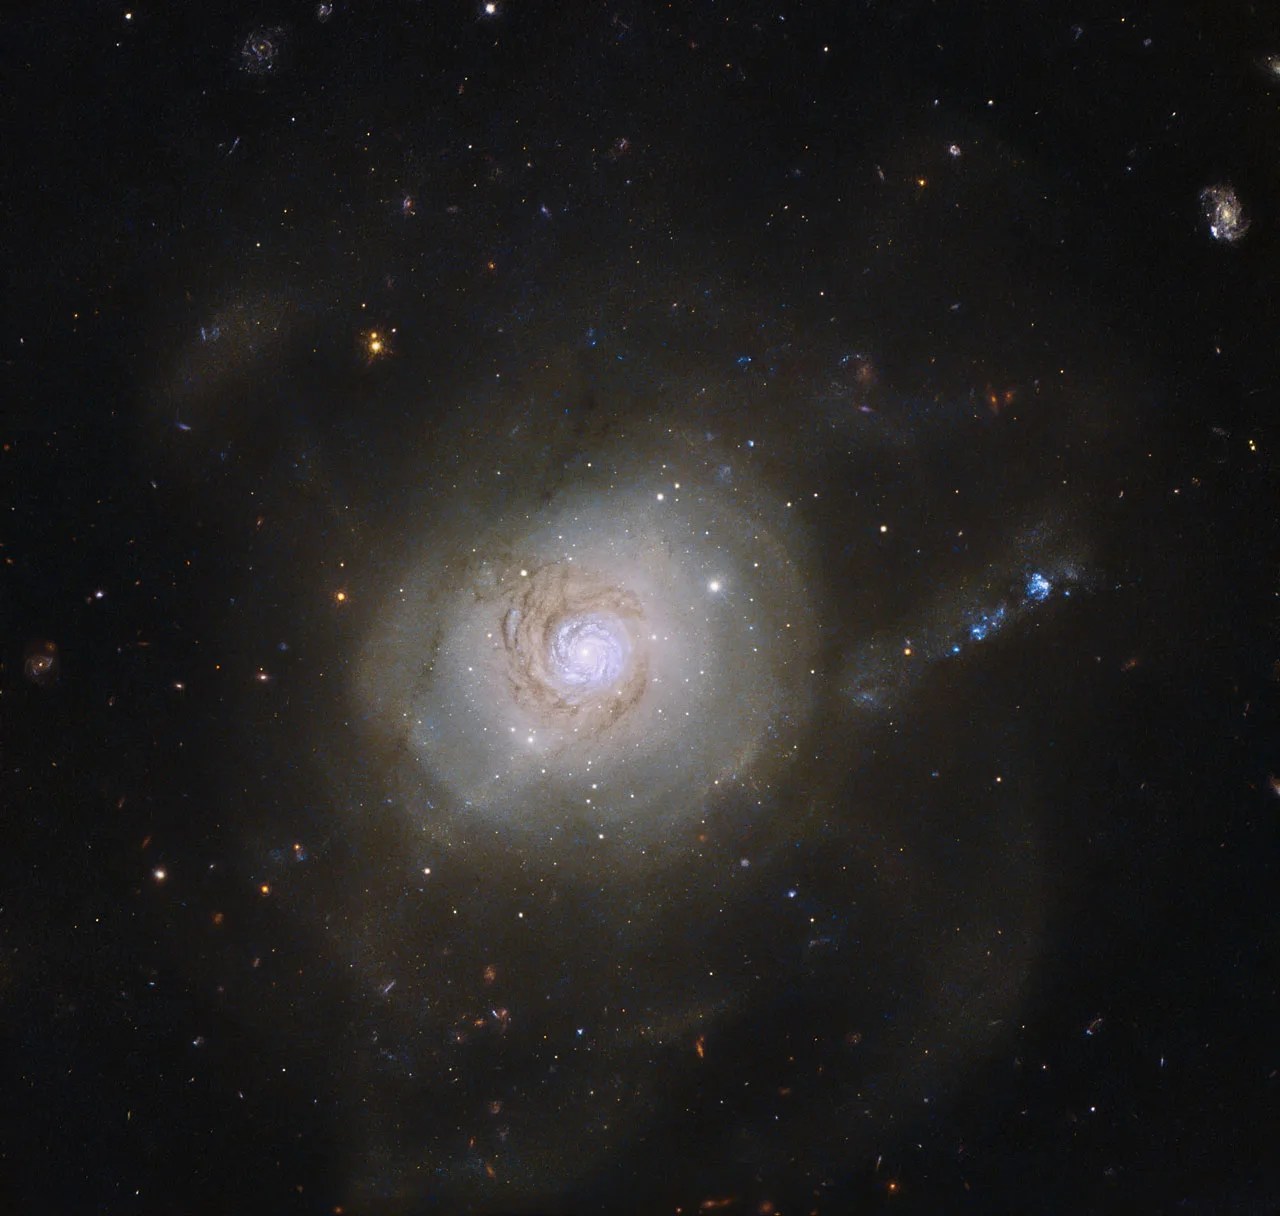 The spiral galaxy ngc 7252 has a superficial resemblance to an atomic nucleus